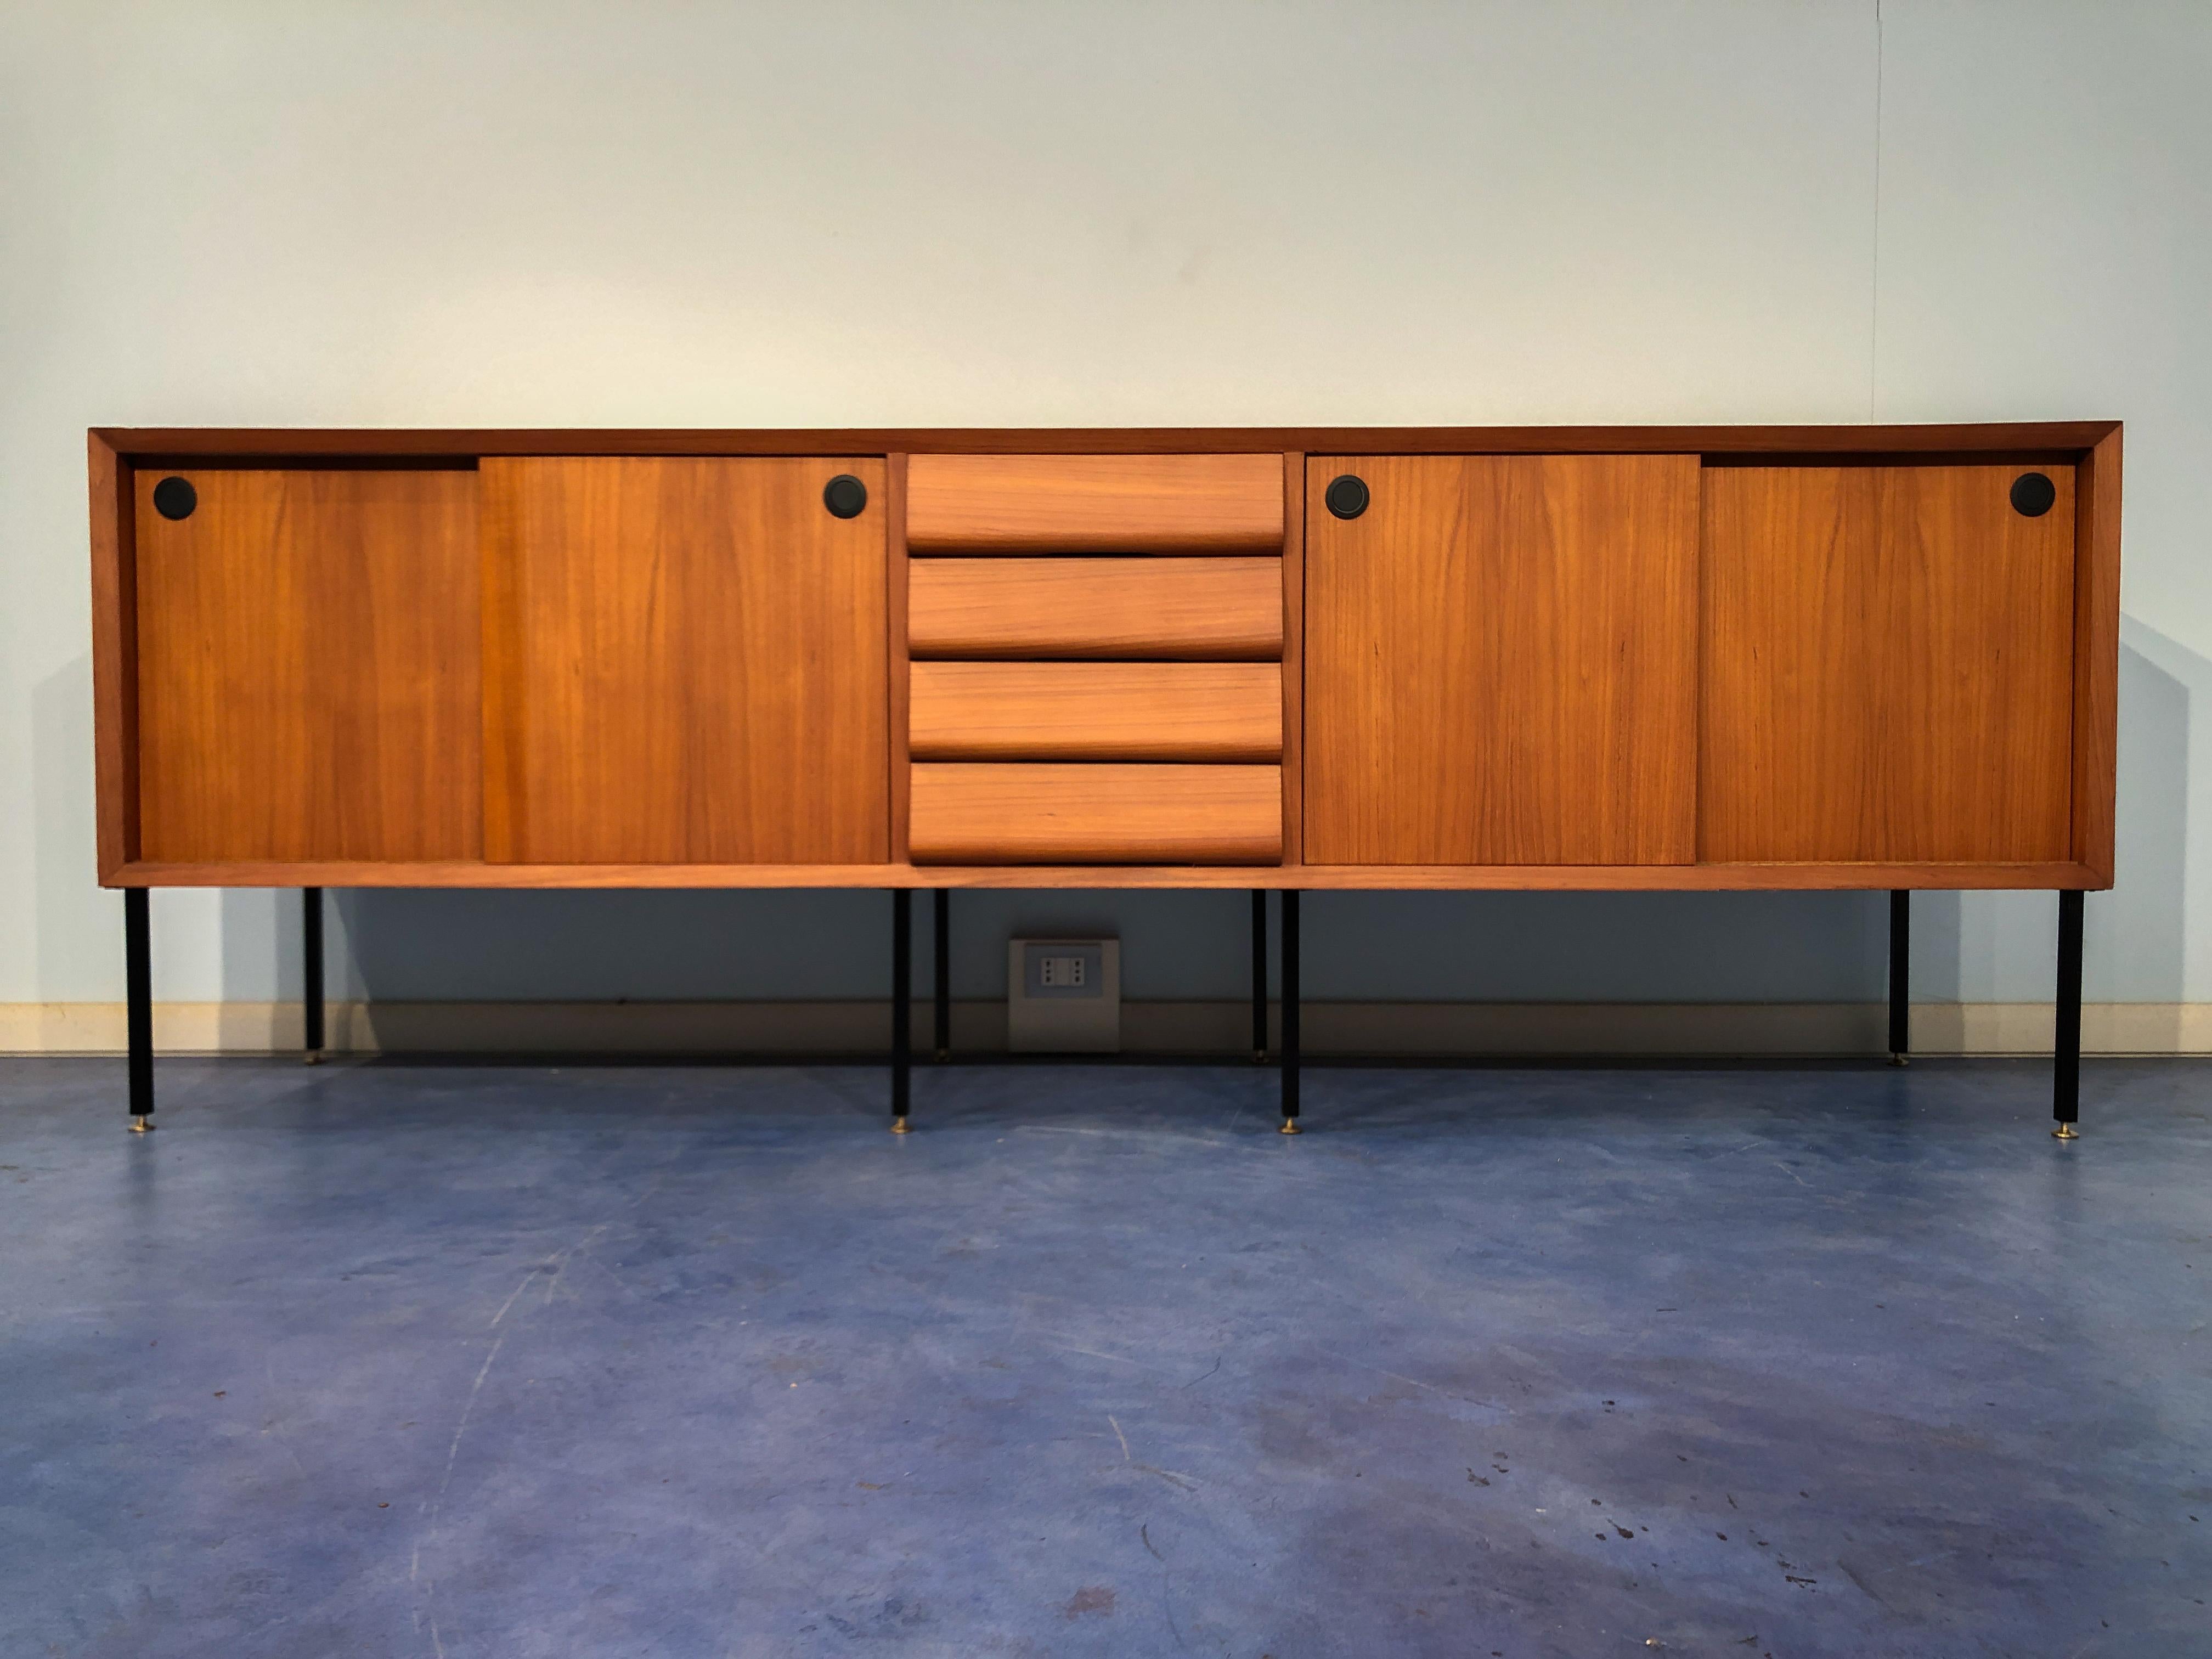 Beautiful Italian Mid-Century Modern teak sideboard with ample storage space within. Its large compartments with shelves hidden behind sliding doors, four drawers in the center with sophisticated design. The sideboard is supported by metal legs